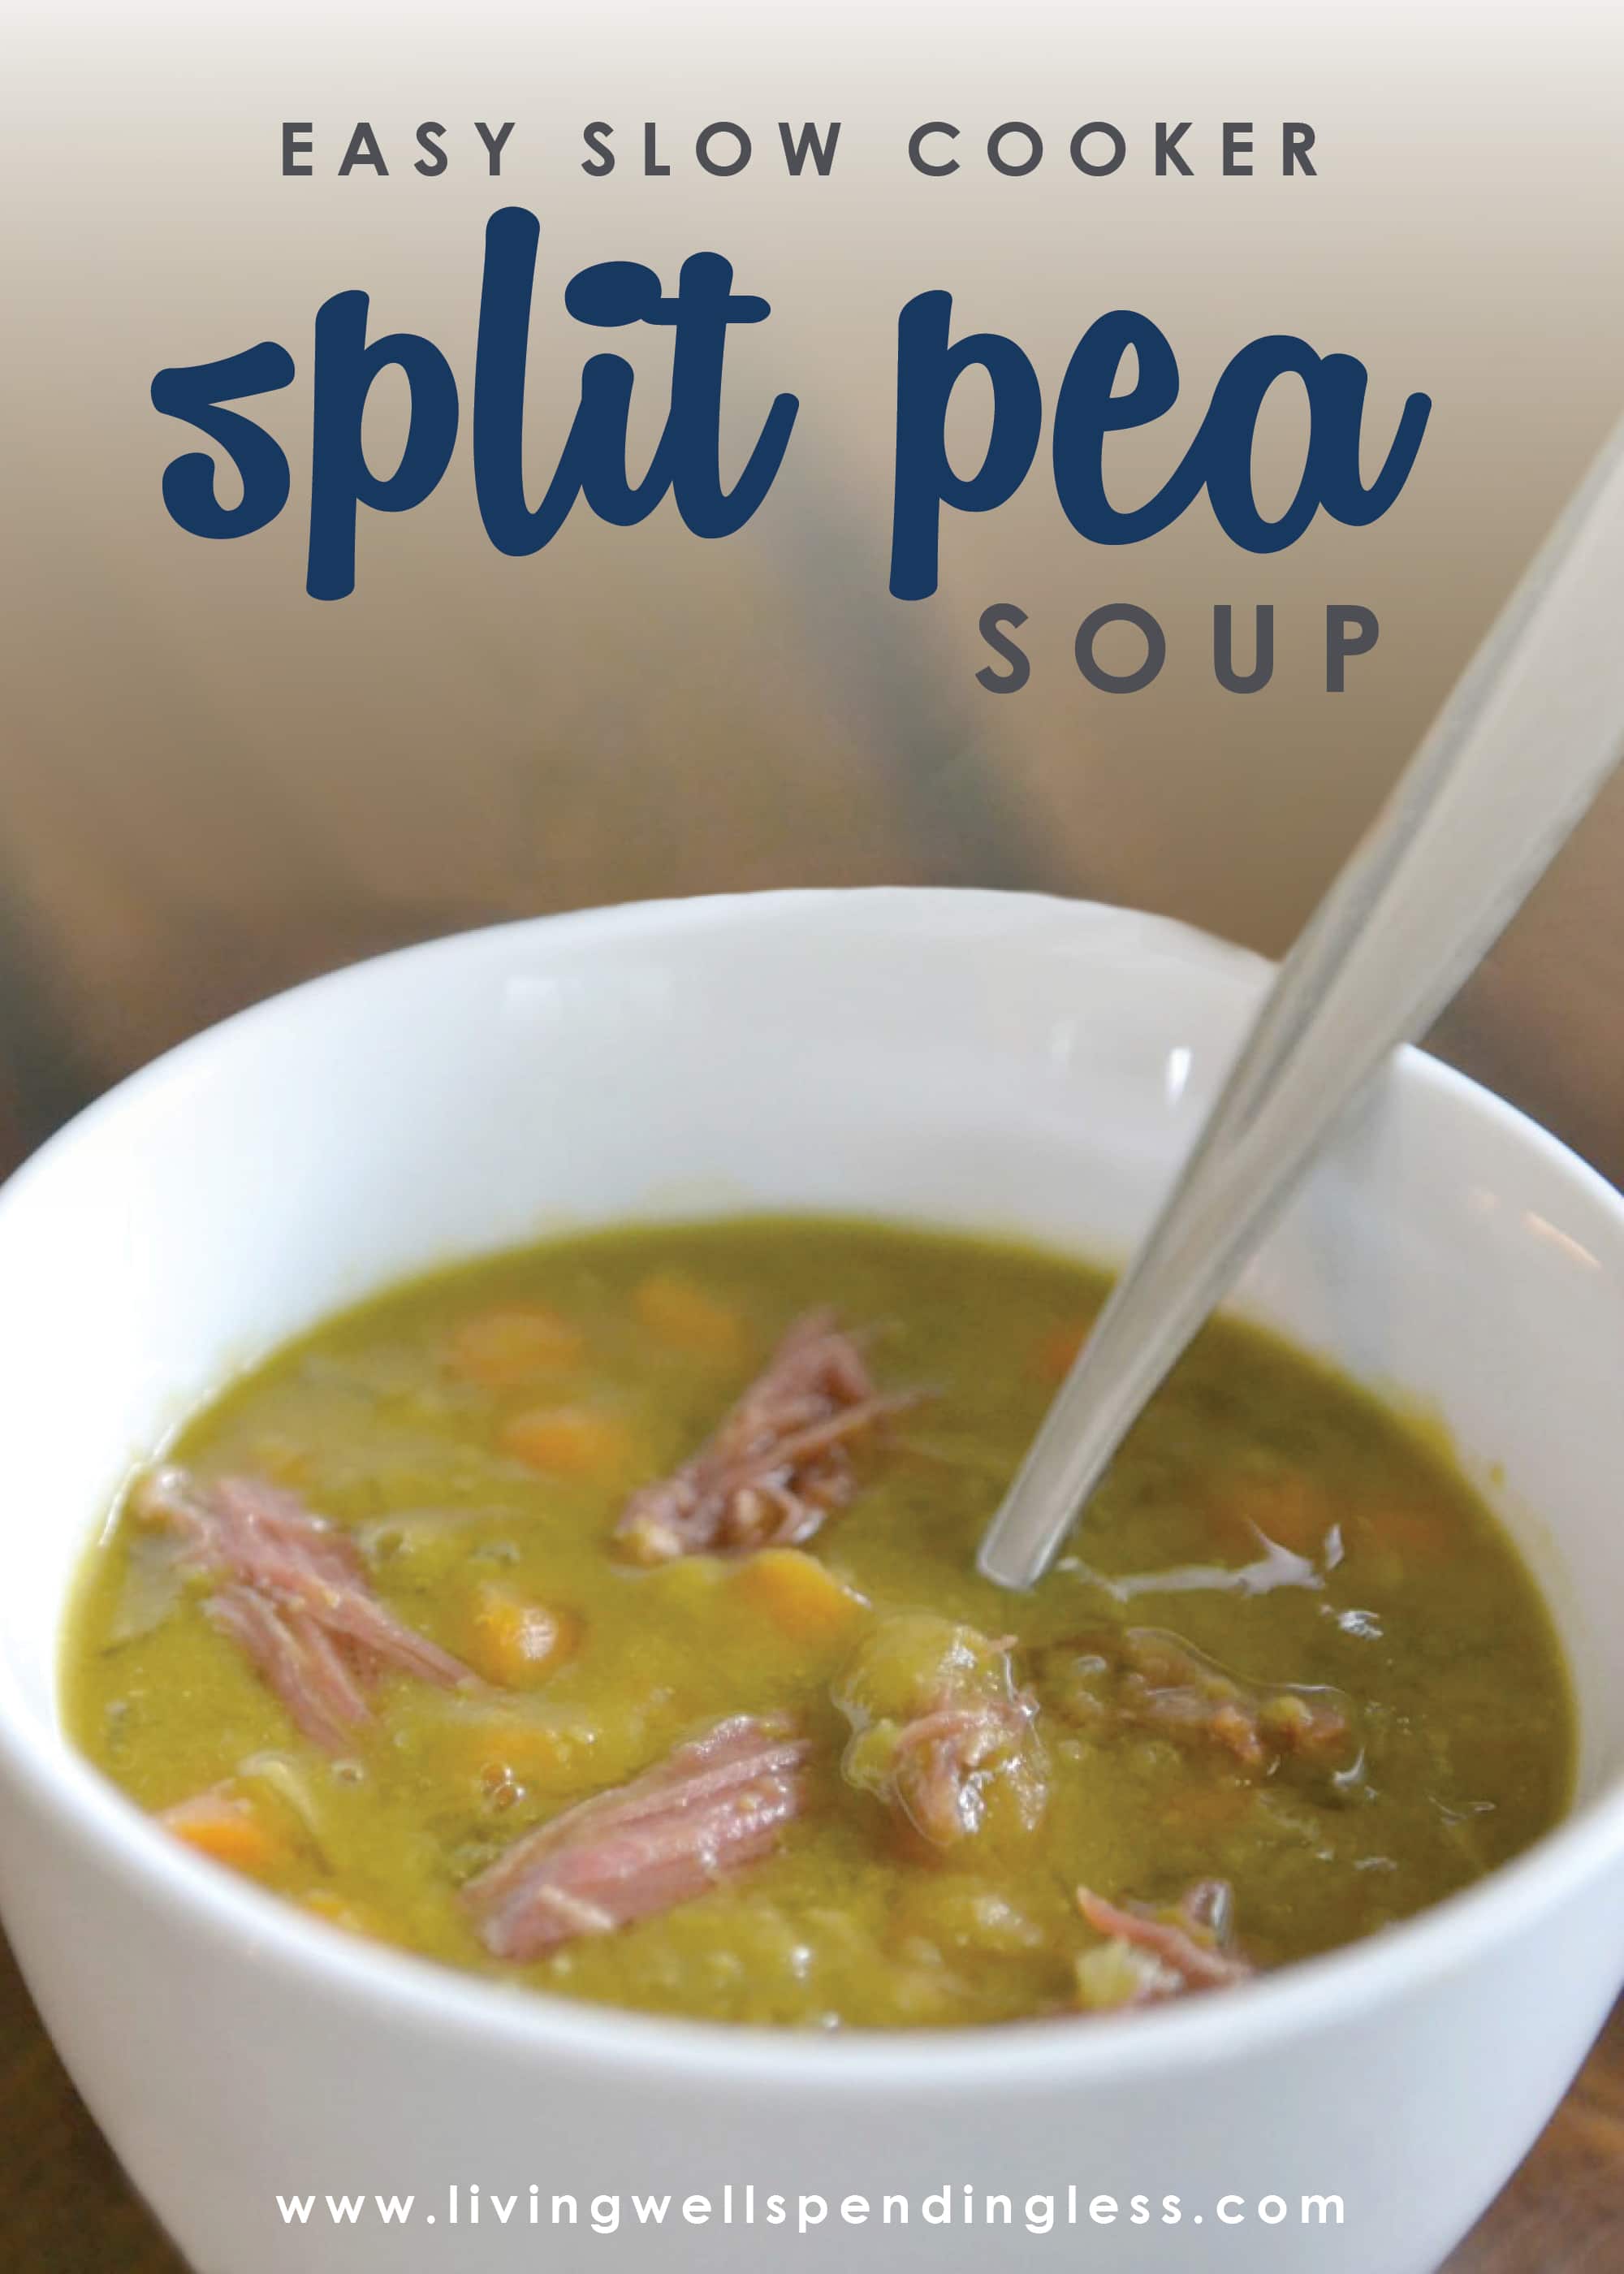 It seriously doesn't get any easier than this delicious and hearty Slow-Cooked Split Pea Soup! It comes together in less than five minutes using just a handful of easy ingredients, then simmers all day in the crockpot for a family-pleasing meal that's ready when you are. 